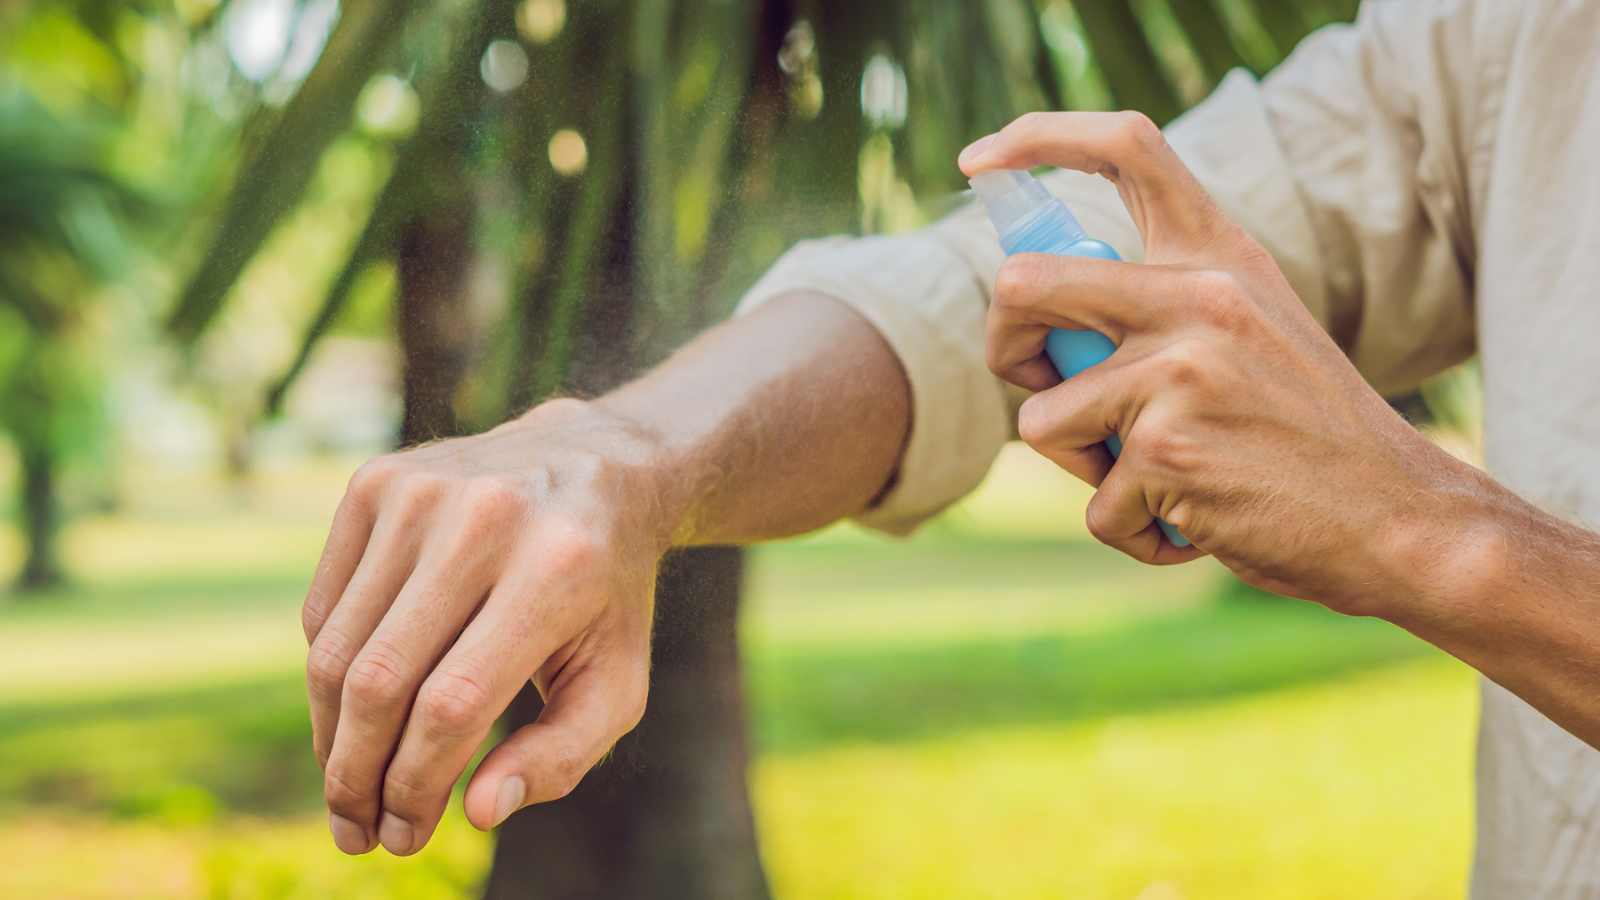 Man Spraying Arm with Homemade Insect Repellent